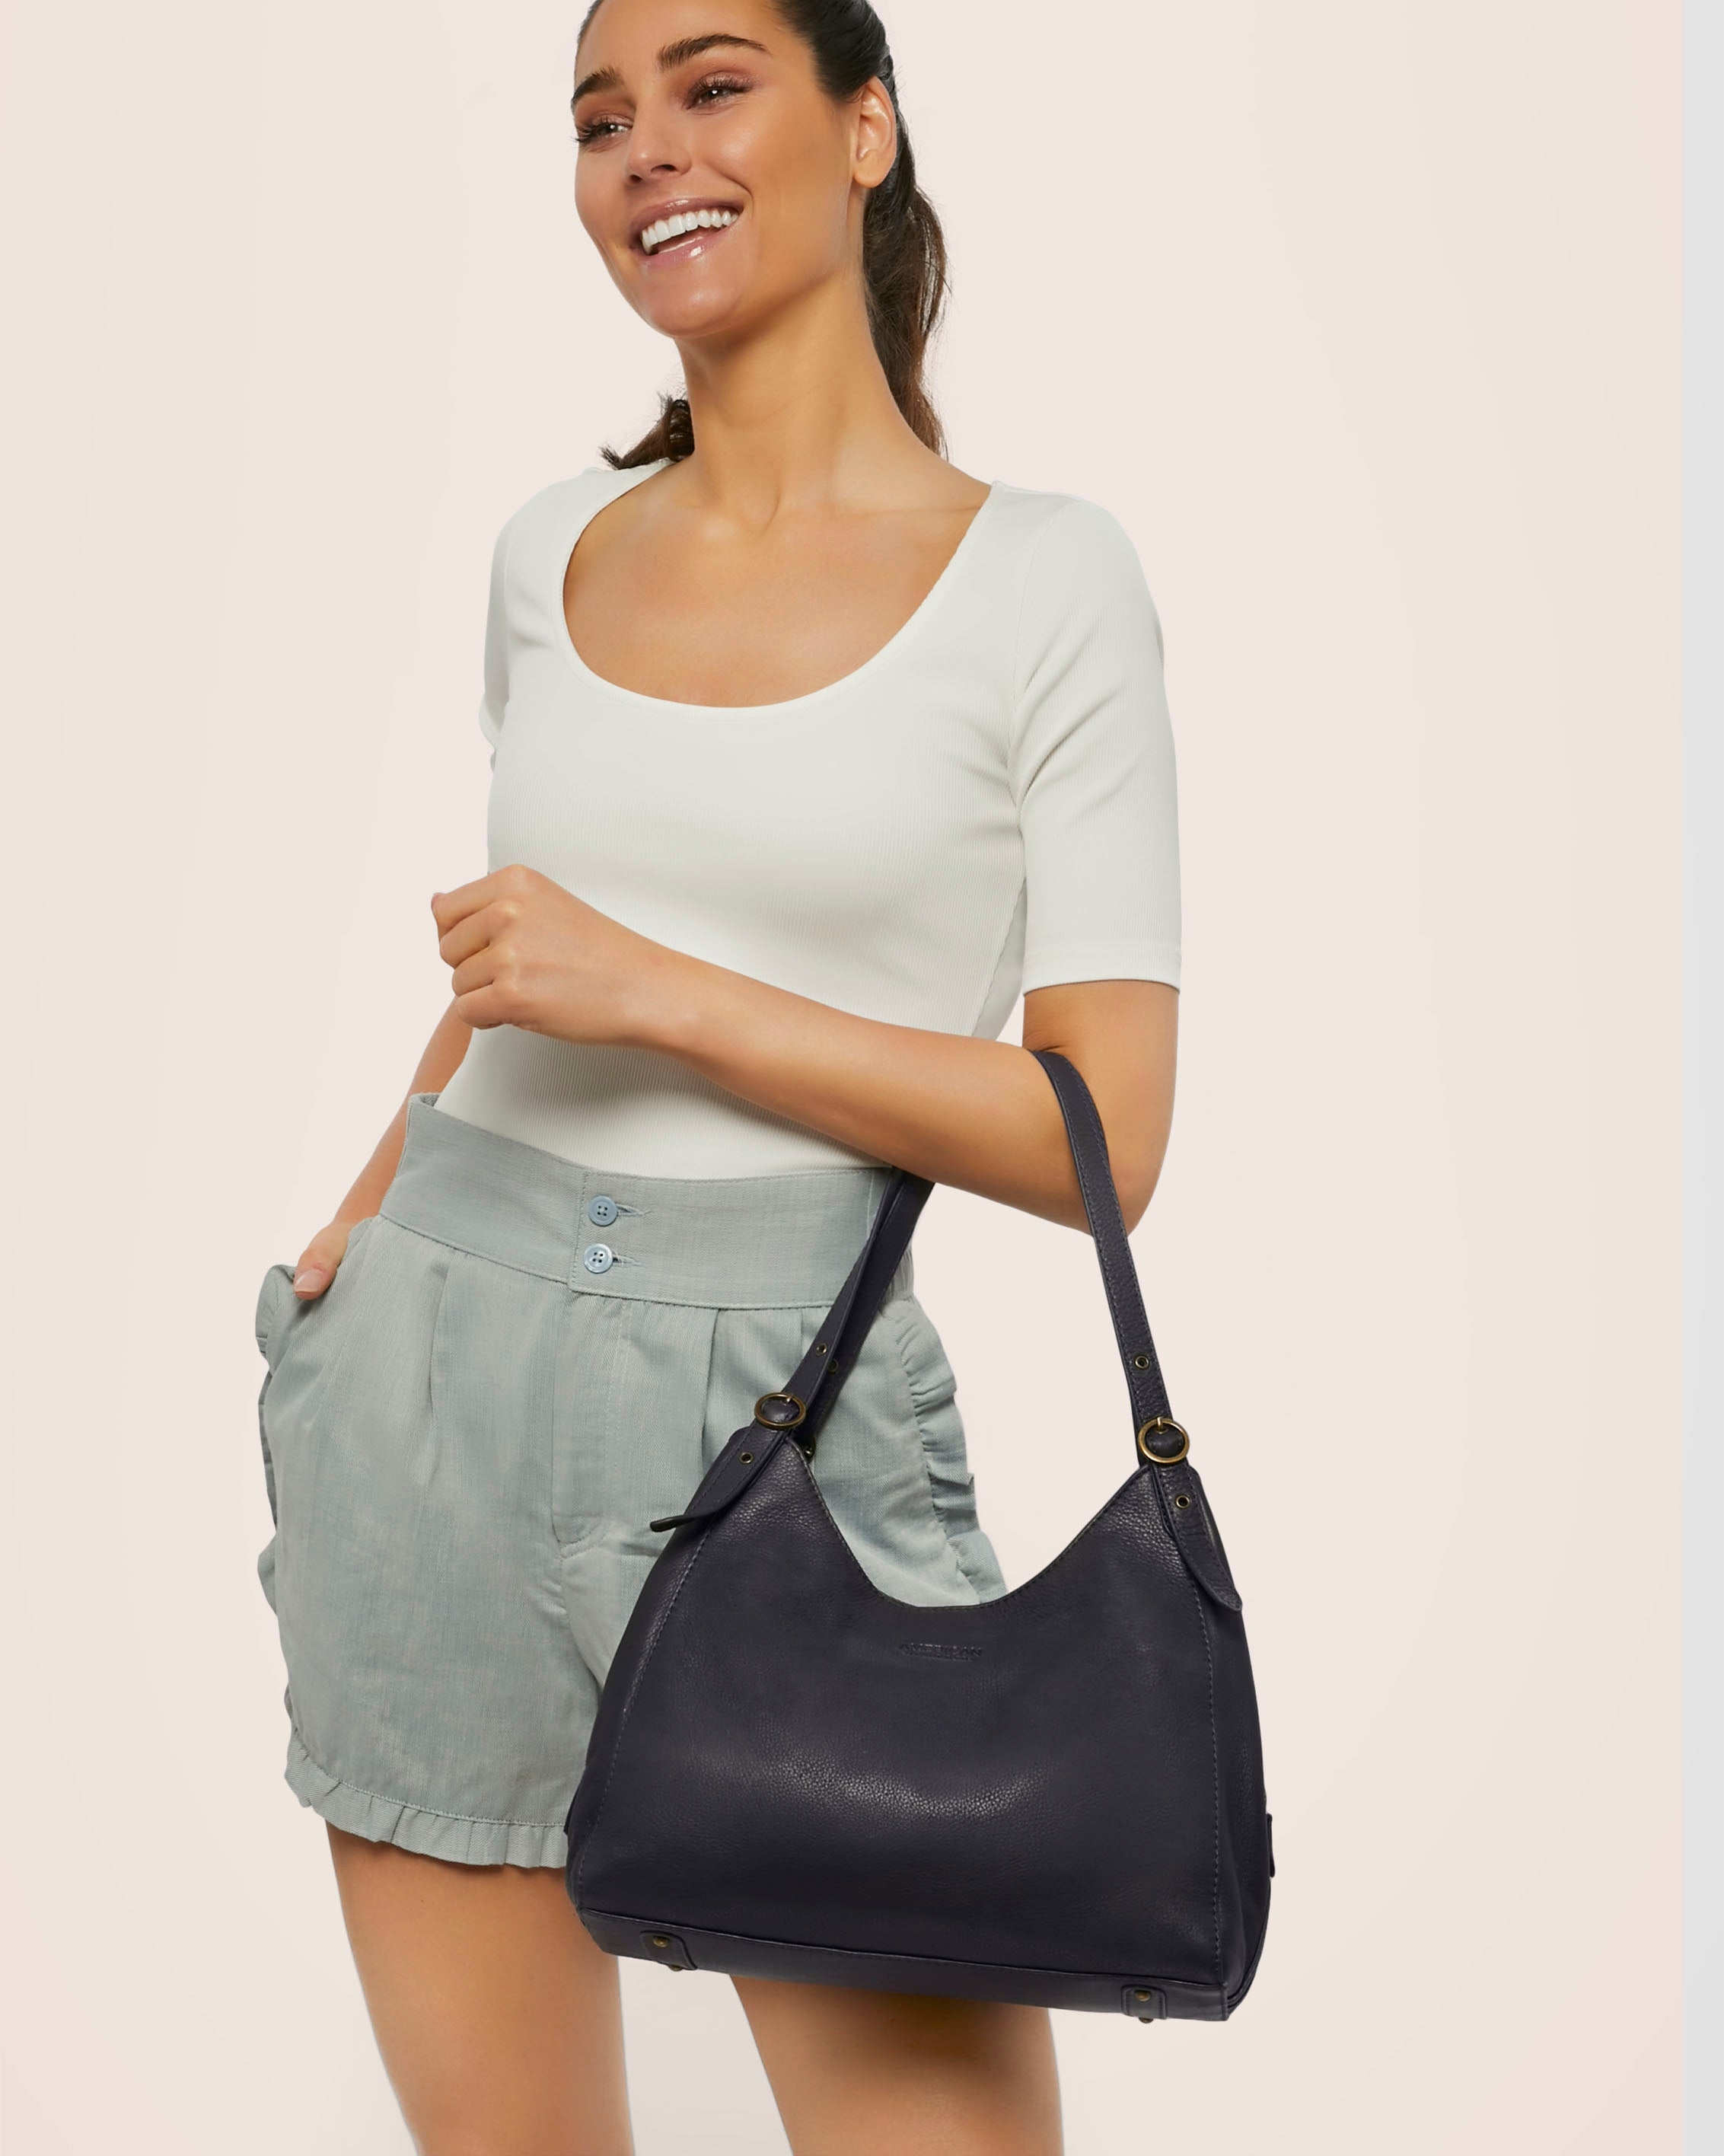 American Leather Co. Fairview Triple Entry Shoulder Bag